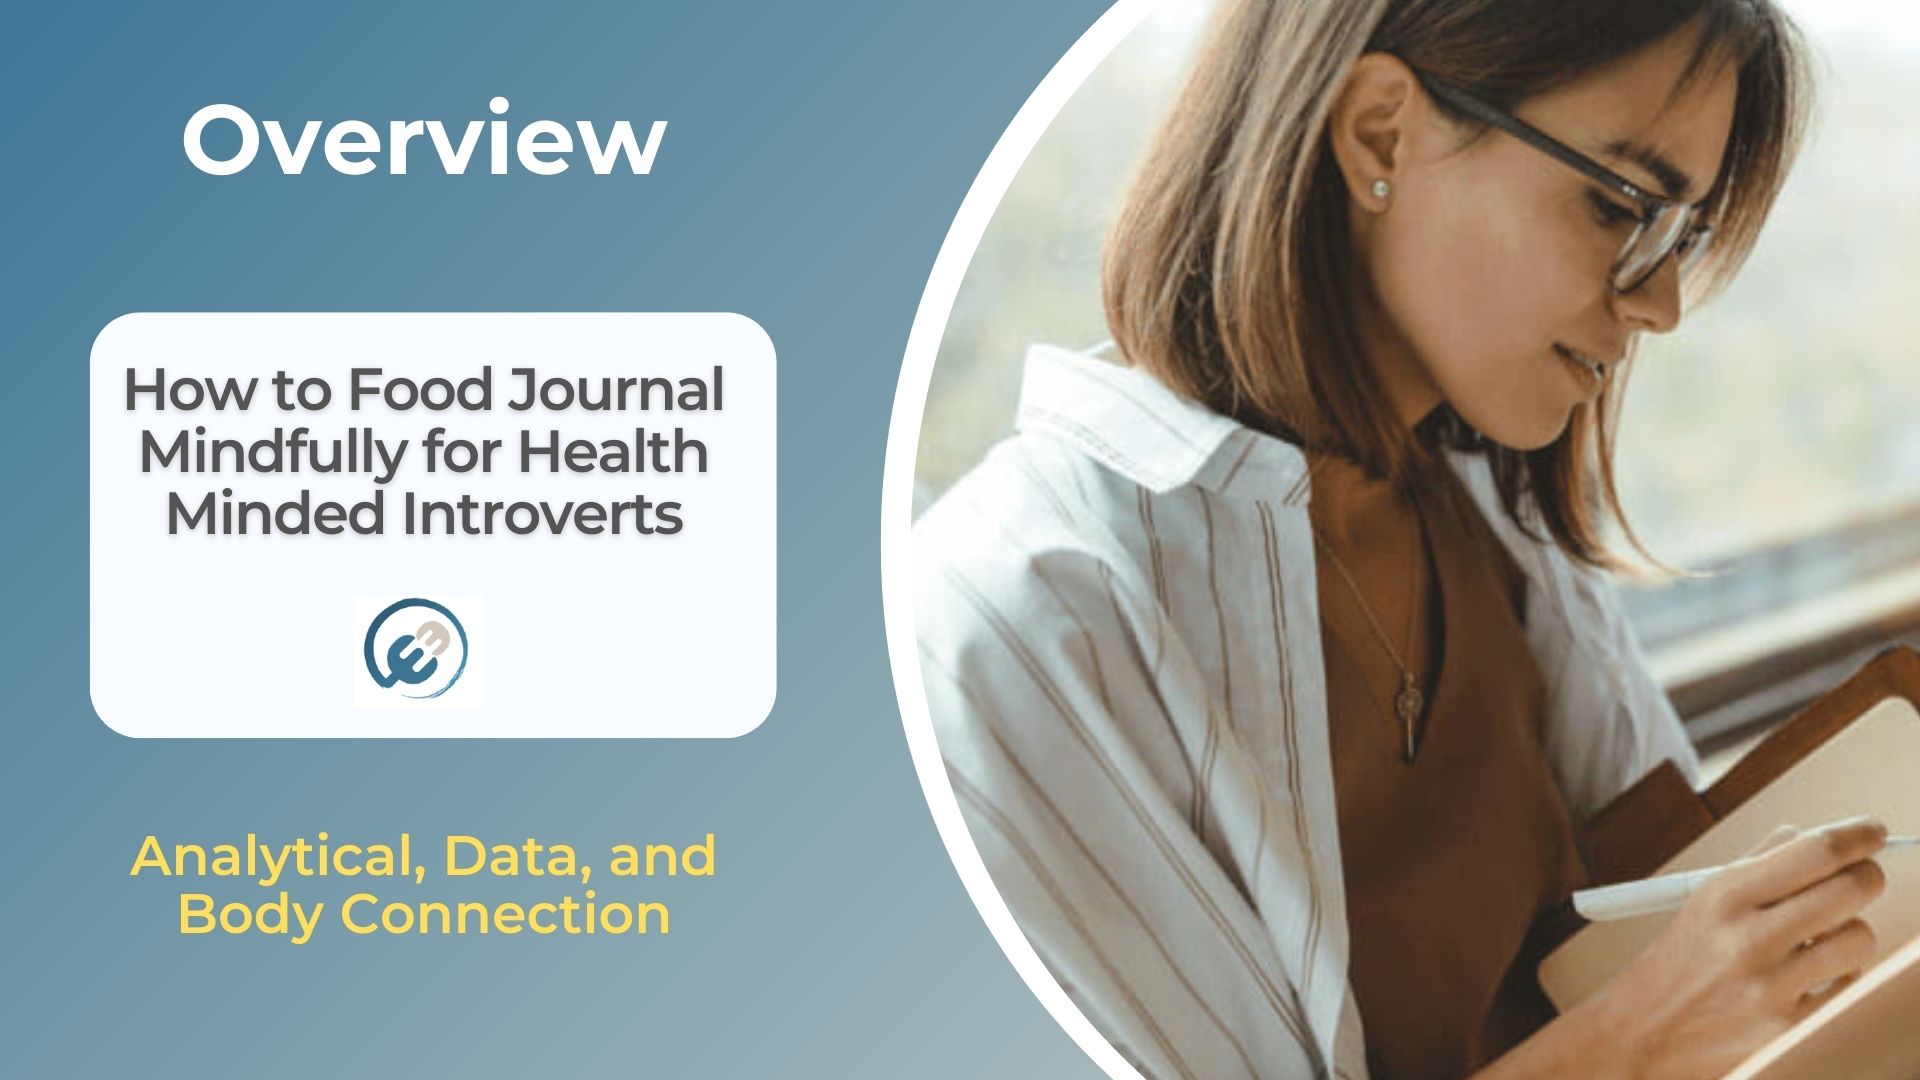 How to Food Journal Mindfully for Health Minded Introverts